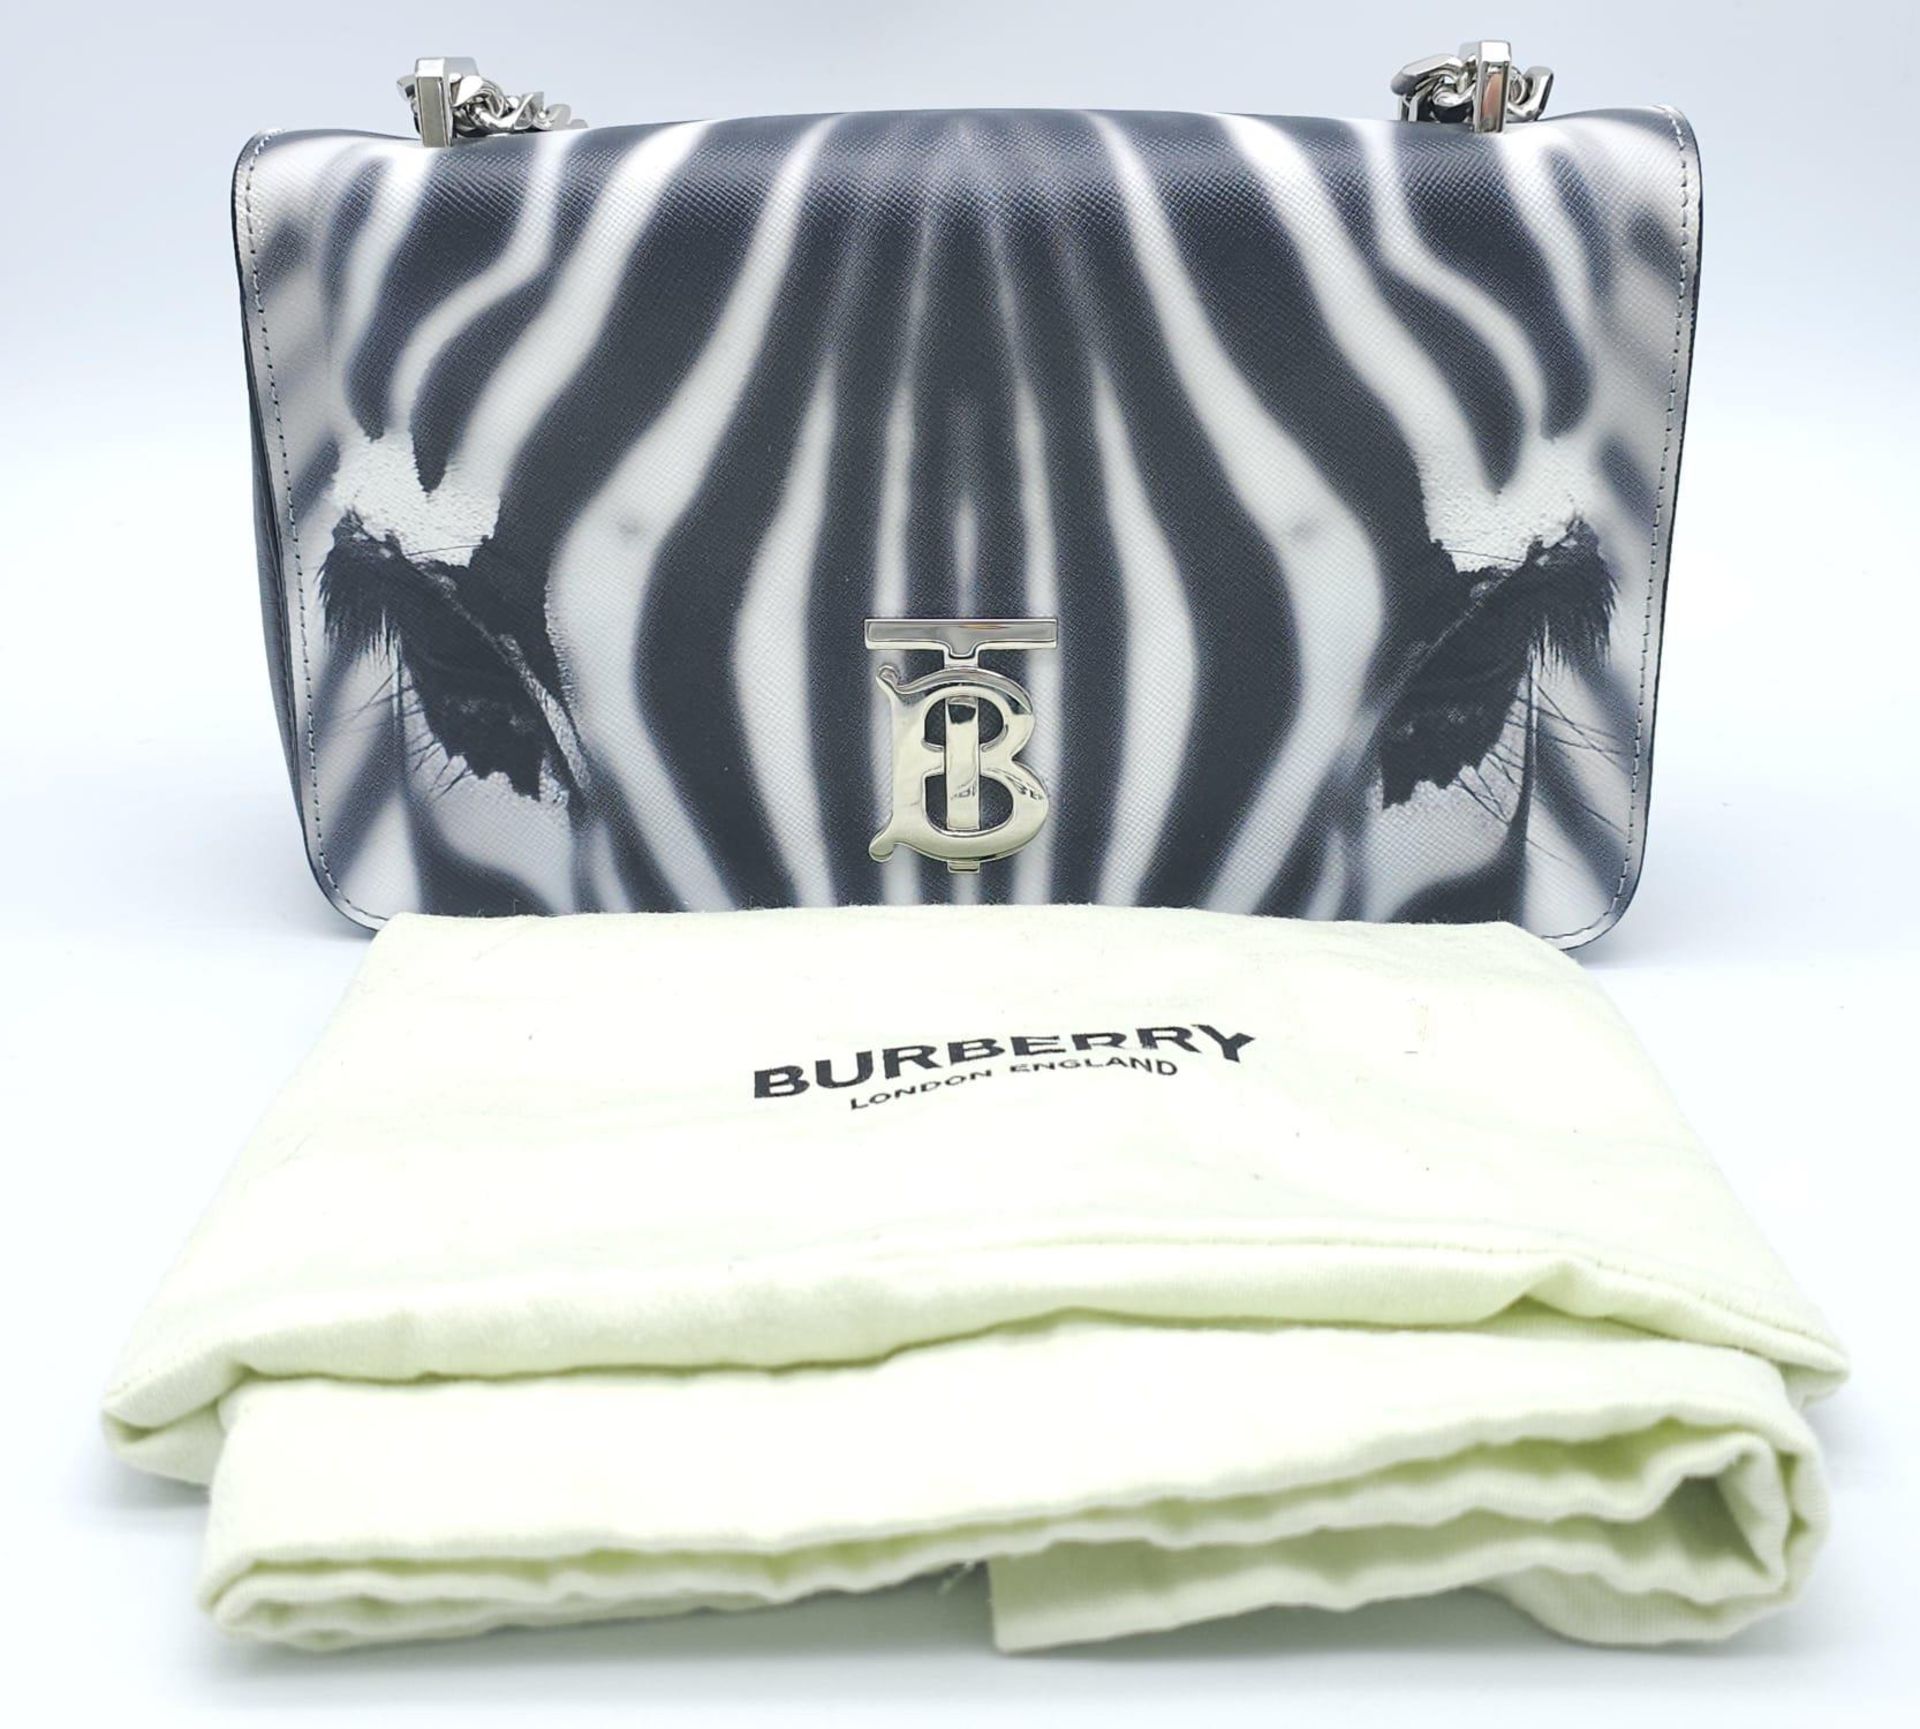 Burberry Zebra Chain Shoulder Bag. Quality leather throughout with a gorgeous print of a Zebra. - Image 13 of 13